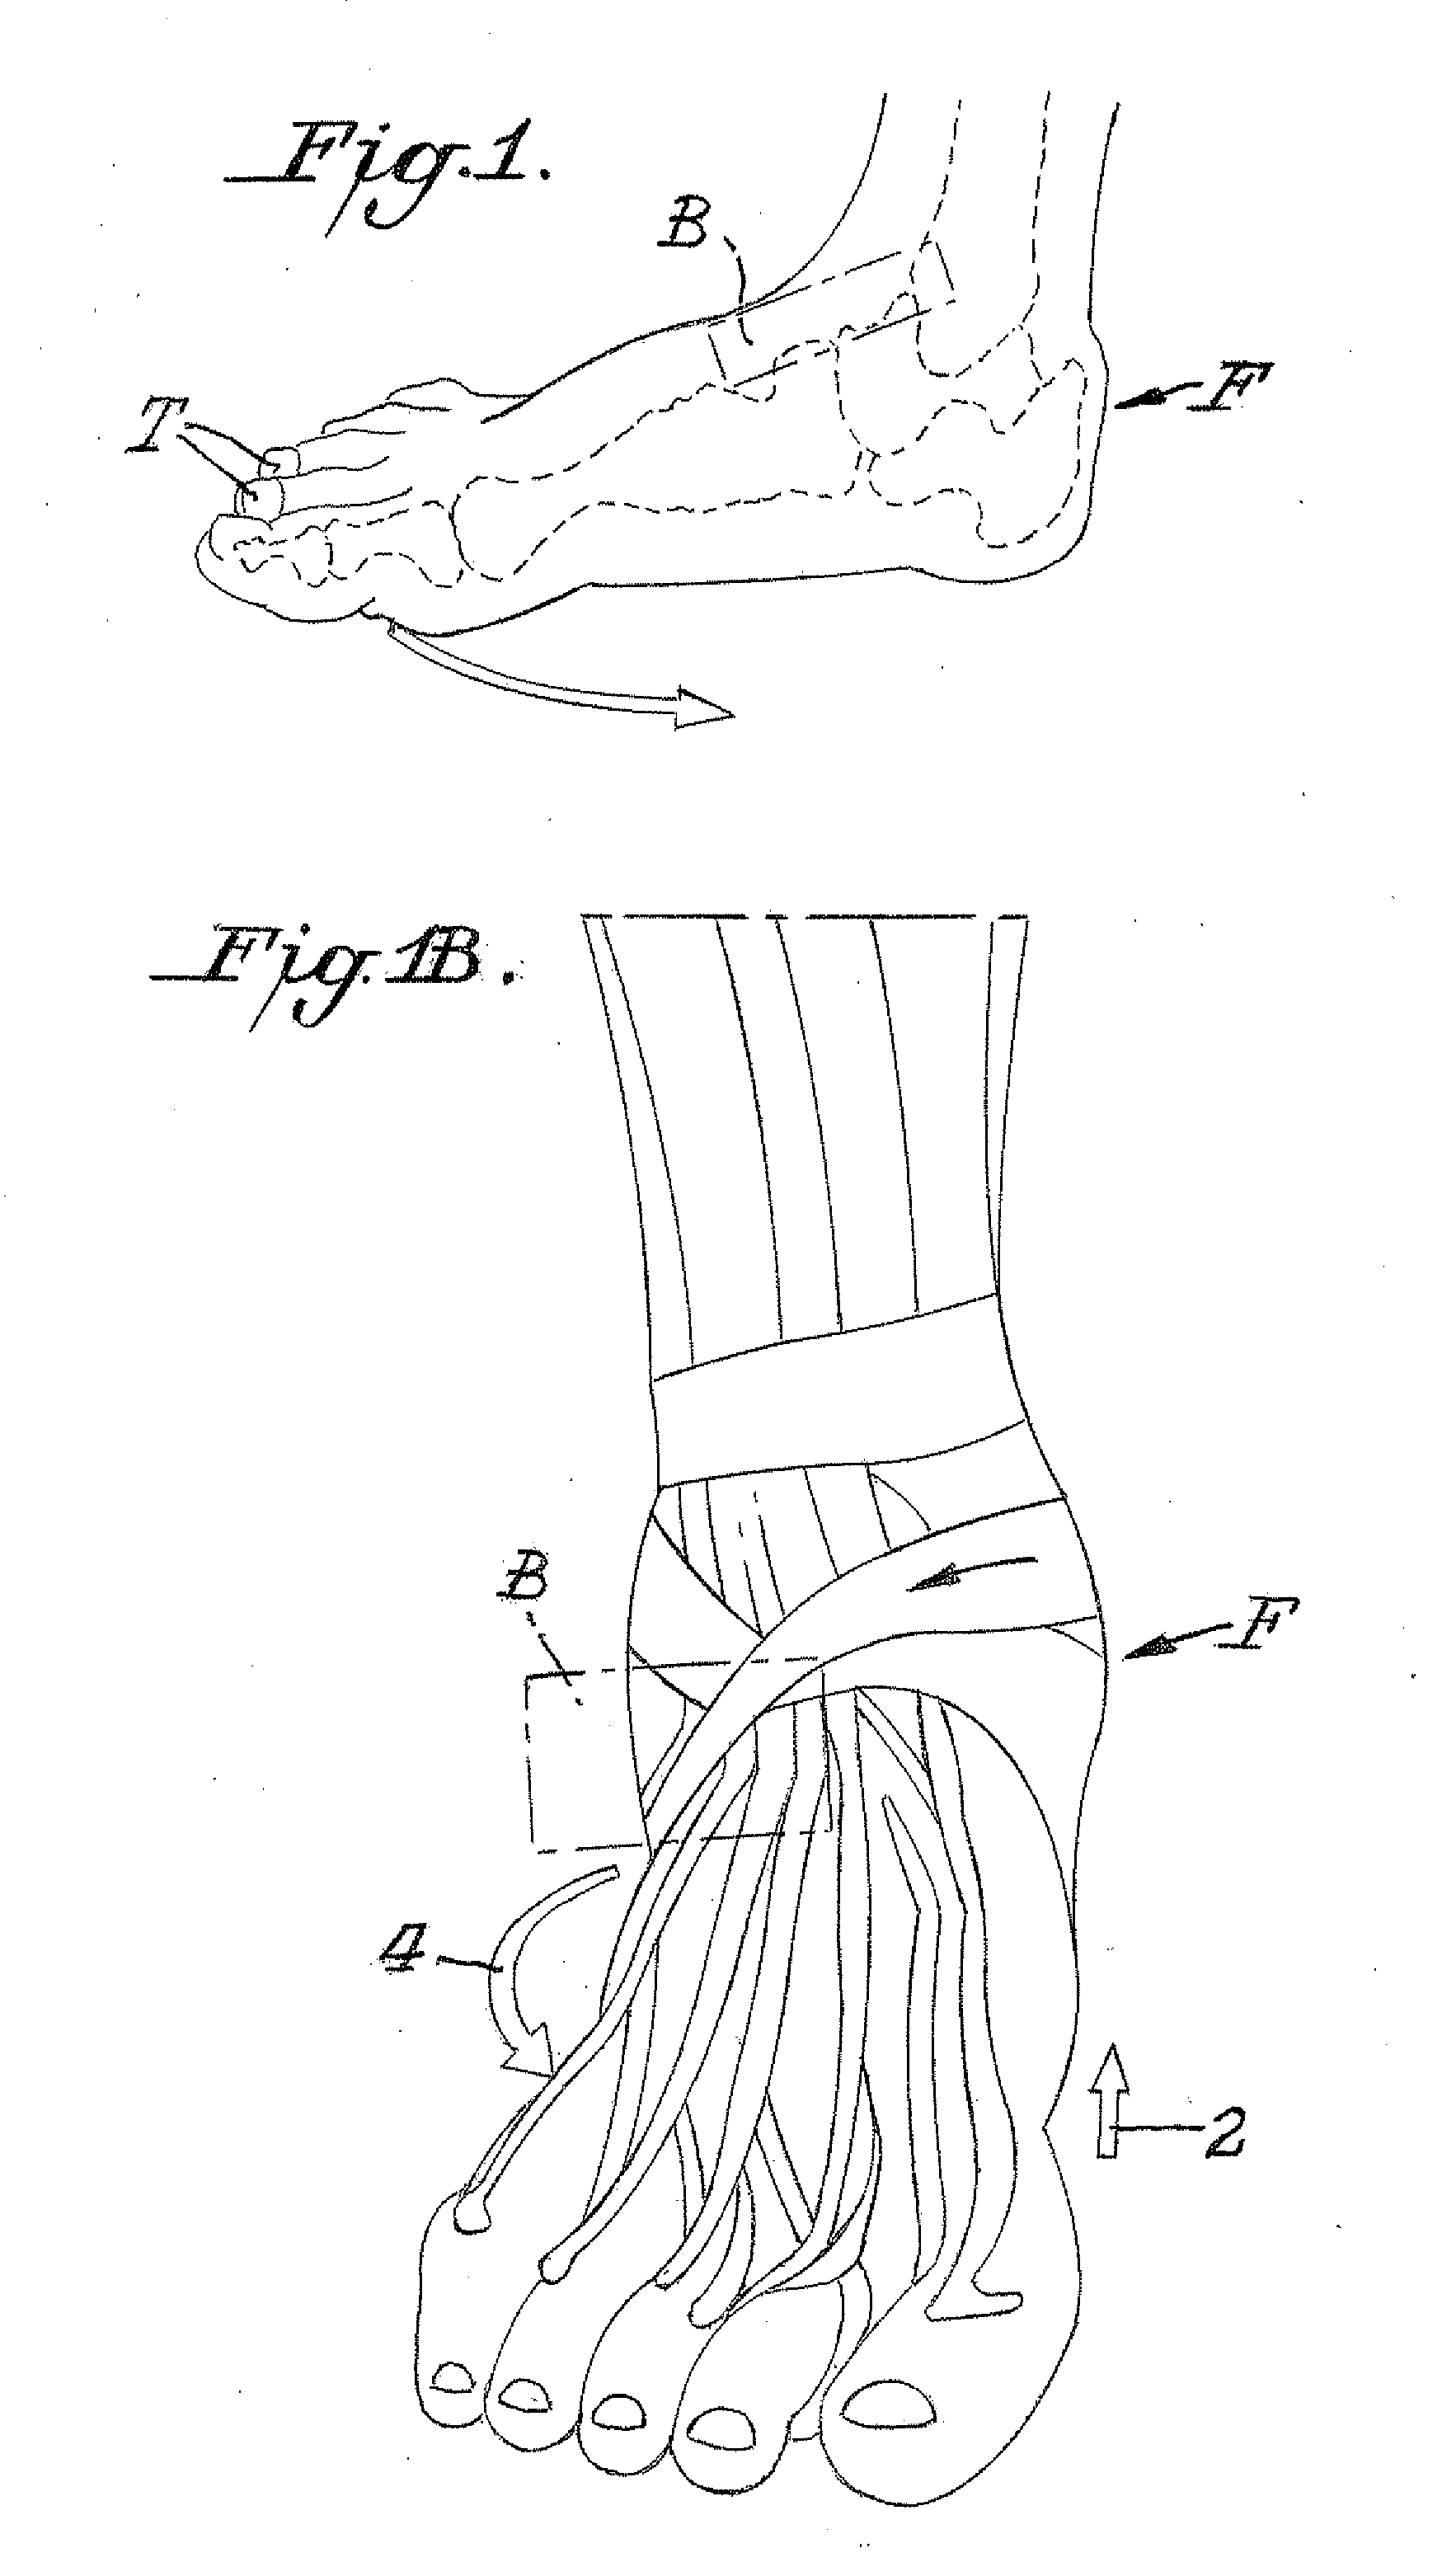 Ankle sprain reduction system